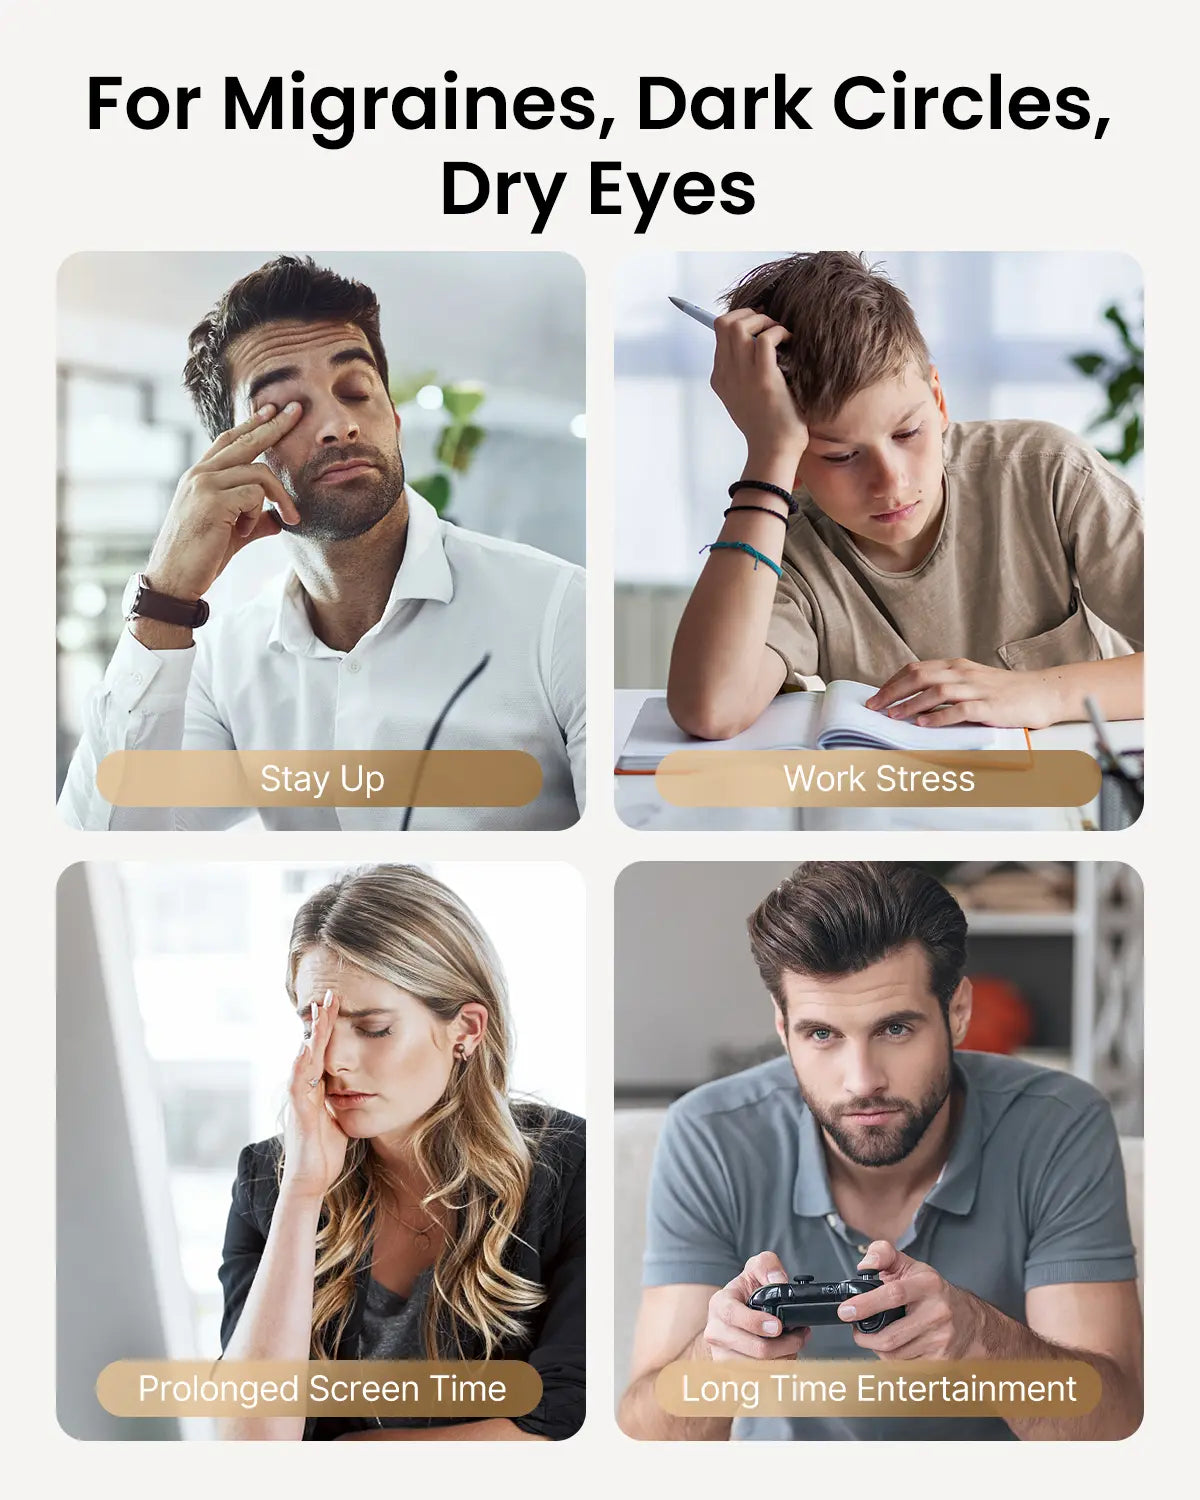 A grid of four images, each depicting a different cause of migraines, dark circles, and dry eyes. Top left: A man in a white shirt rubbing his eyes labeled "Stay Up." Top right: A boy holding his head labeled "Work Stress." Bottom left: A woman touching her temple labeled "Prolonged Screen Time." Bottom right: A man holding a game controller labeled "Long Time" with the Eyeris 3 Eye Massager by Renpho EU nearby.